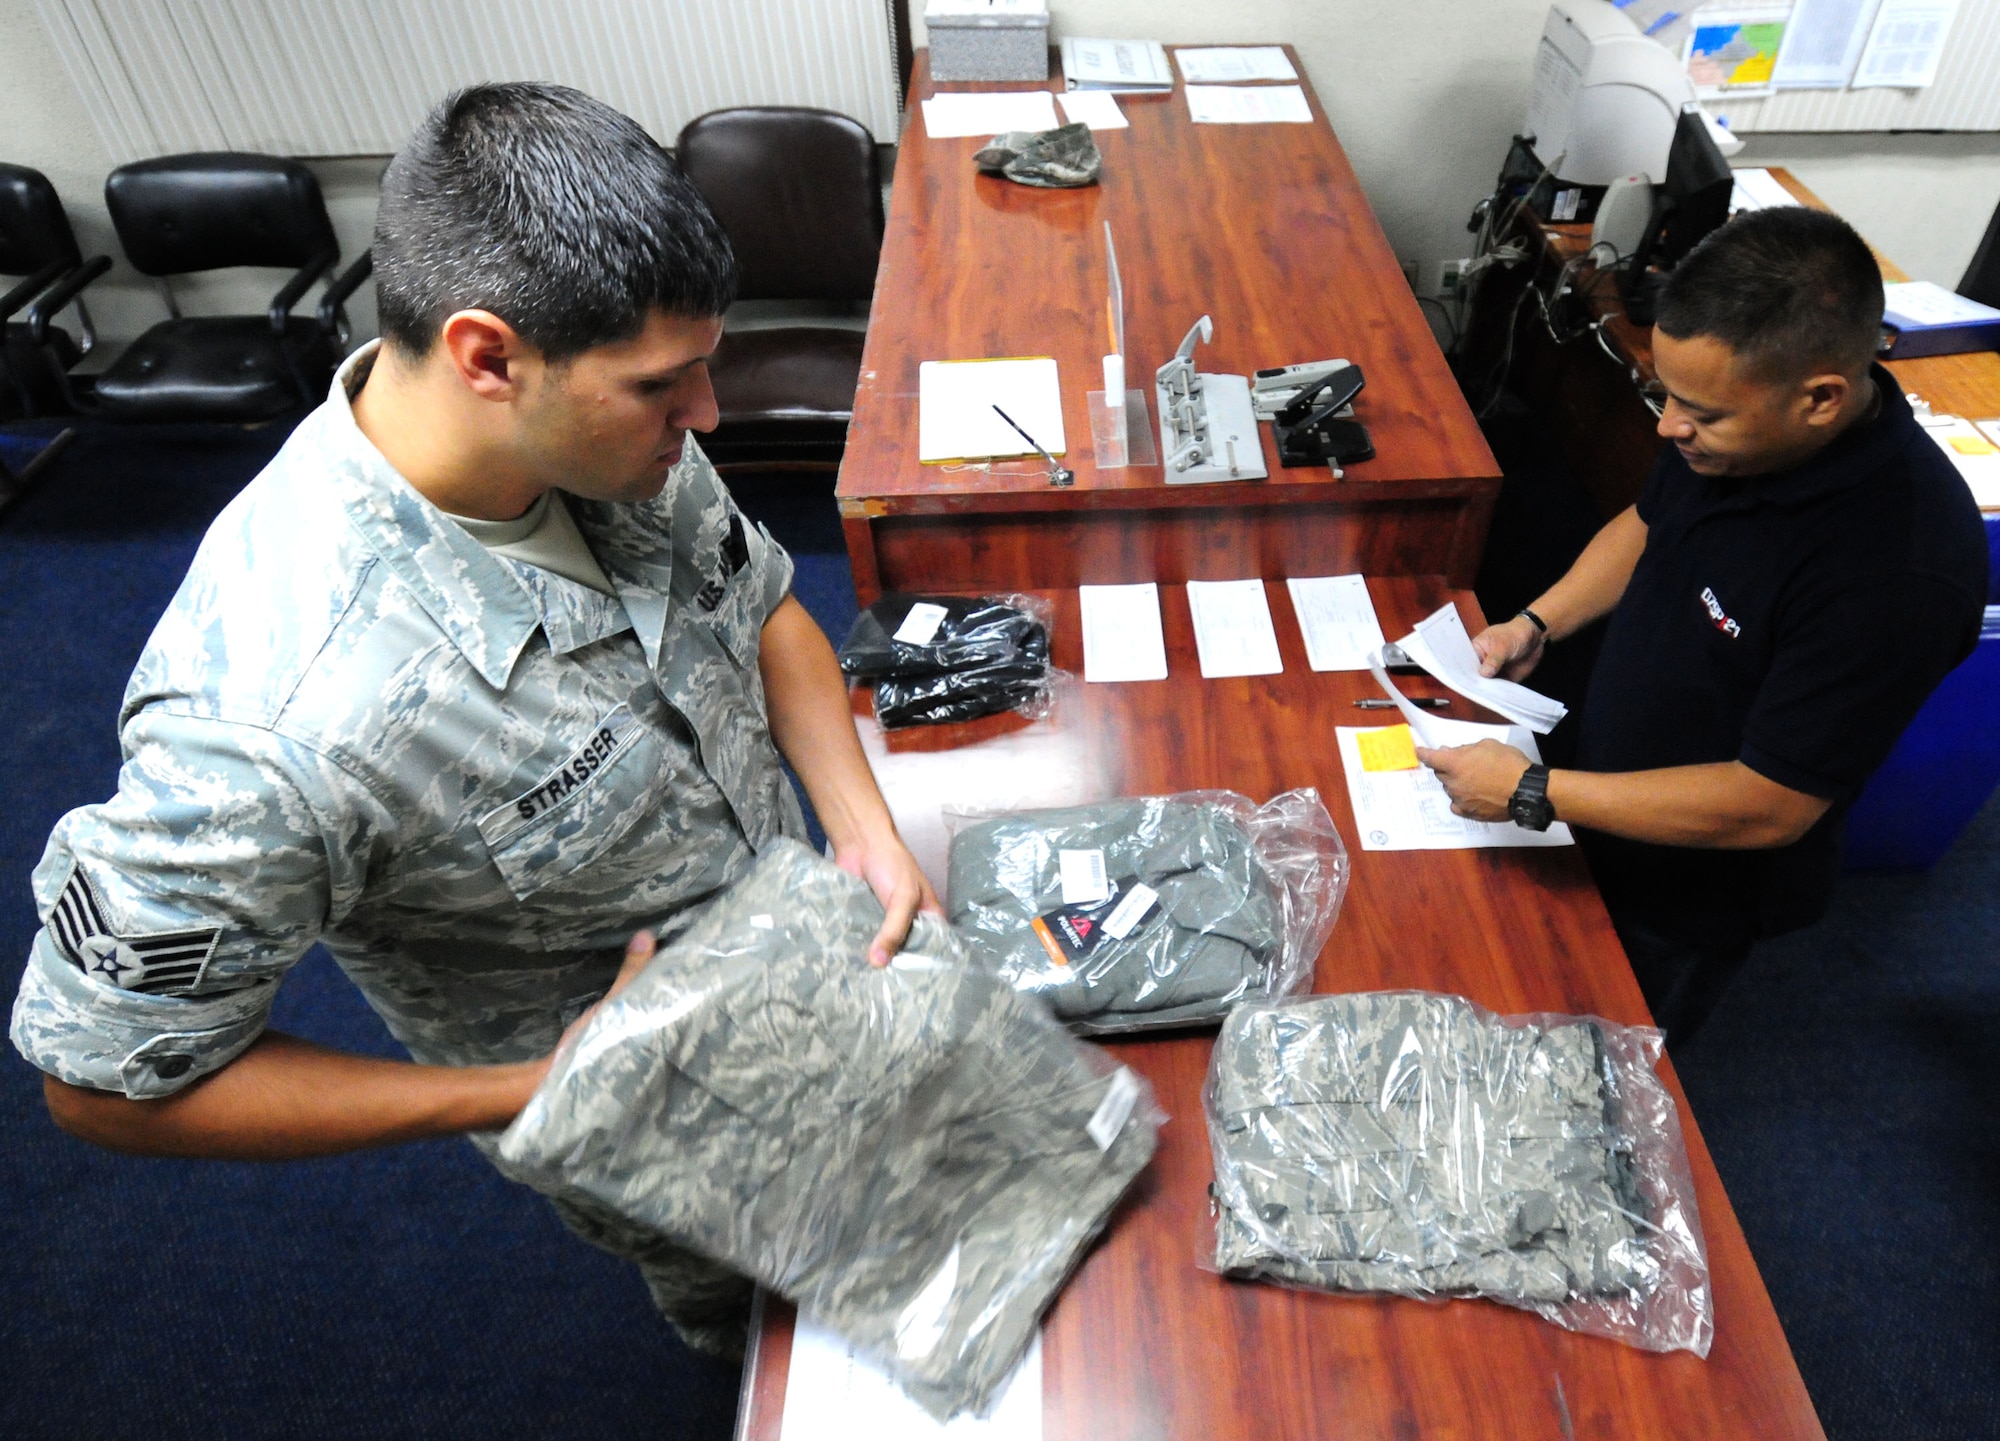 ANDERSEN AIR FORCE BASE, Guam— Staff Sgt. Kurtis Strasser, 734th Air Mobility Squadron unit deployment manager, receives an order from Duane Chargualaf, 36th Logistics Readiness Squadron individual equipment unit warehouse specialist, July 20. Approximately 80 to 100 individual issue requests are filled by IEU daily. (U.S Air Force photo by Senior Airman Benjamin Wiseman/Released)